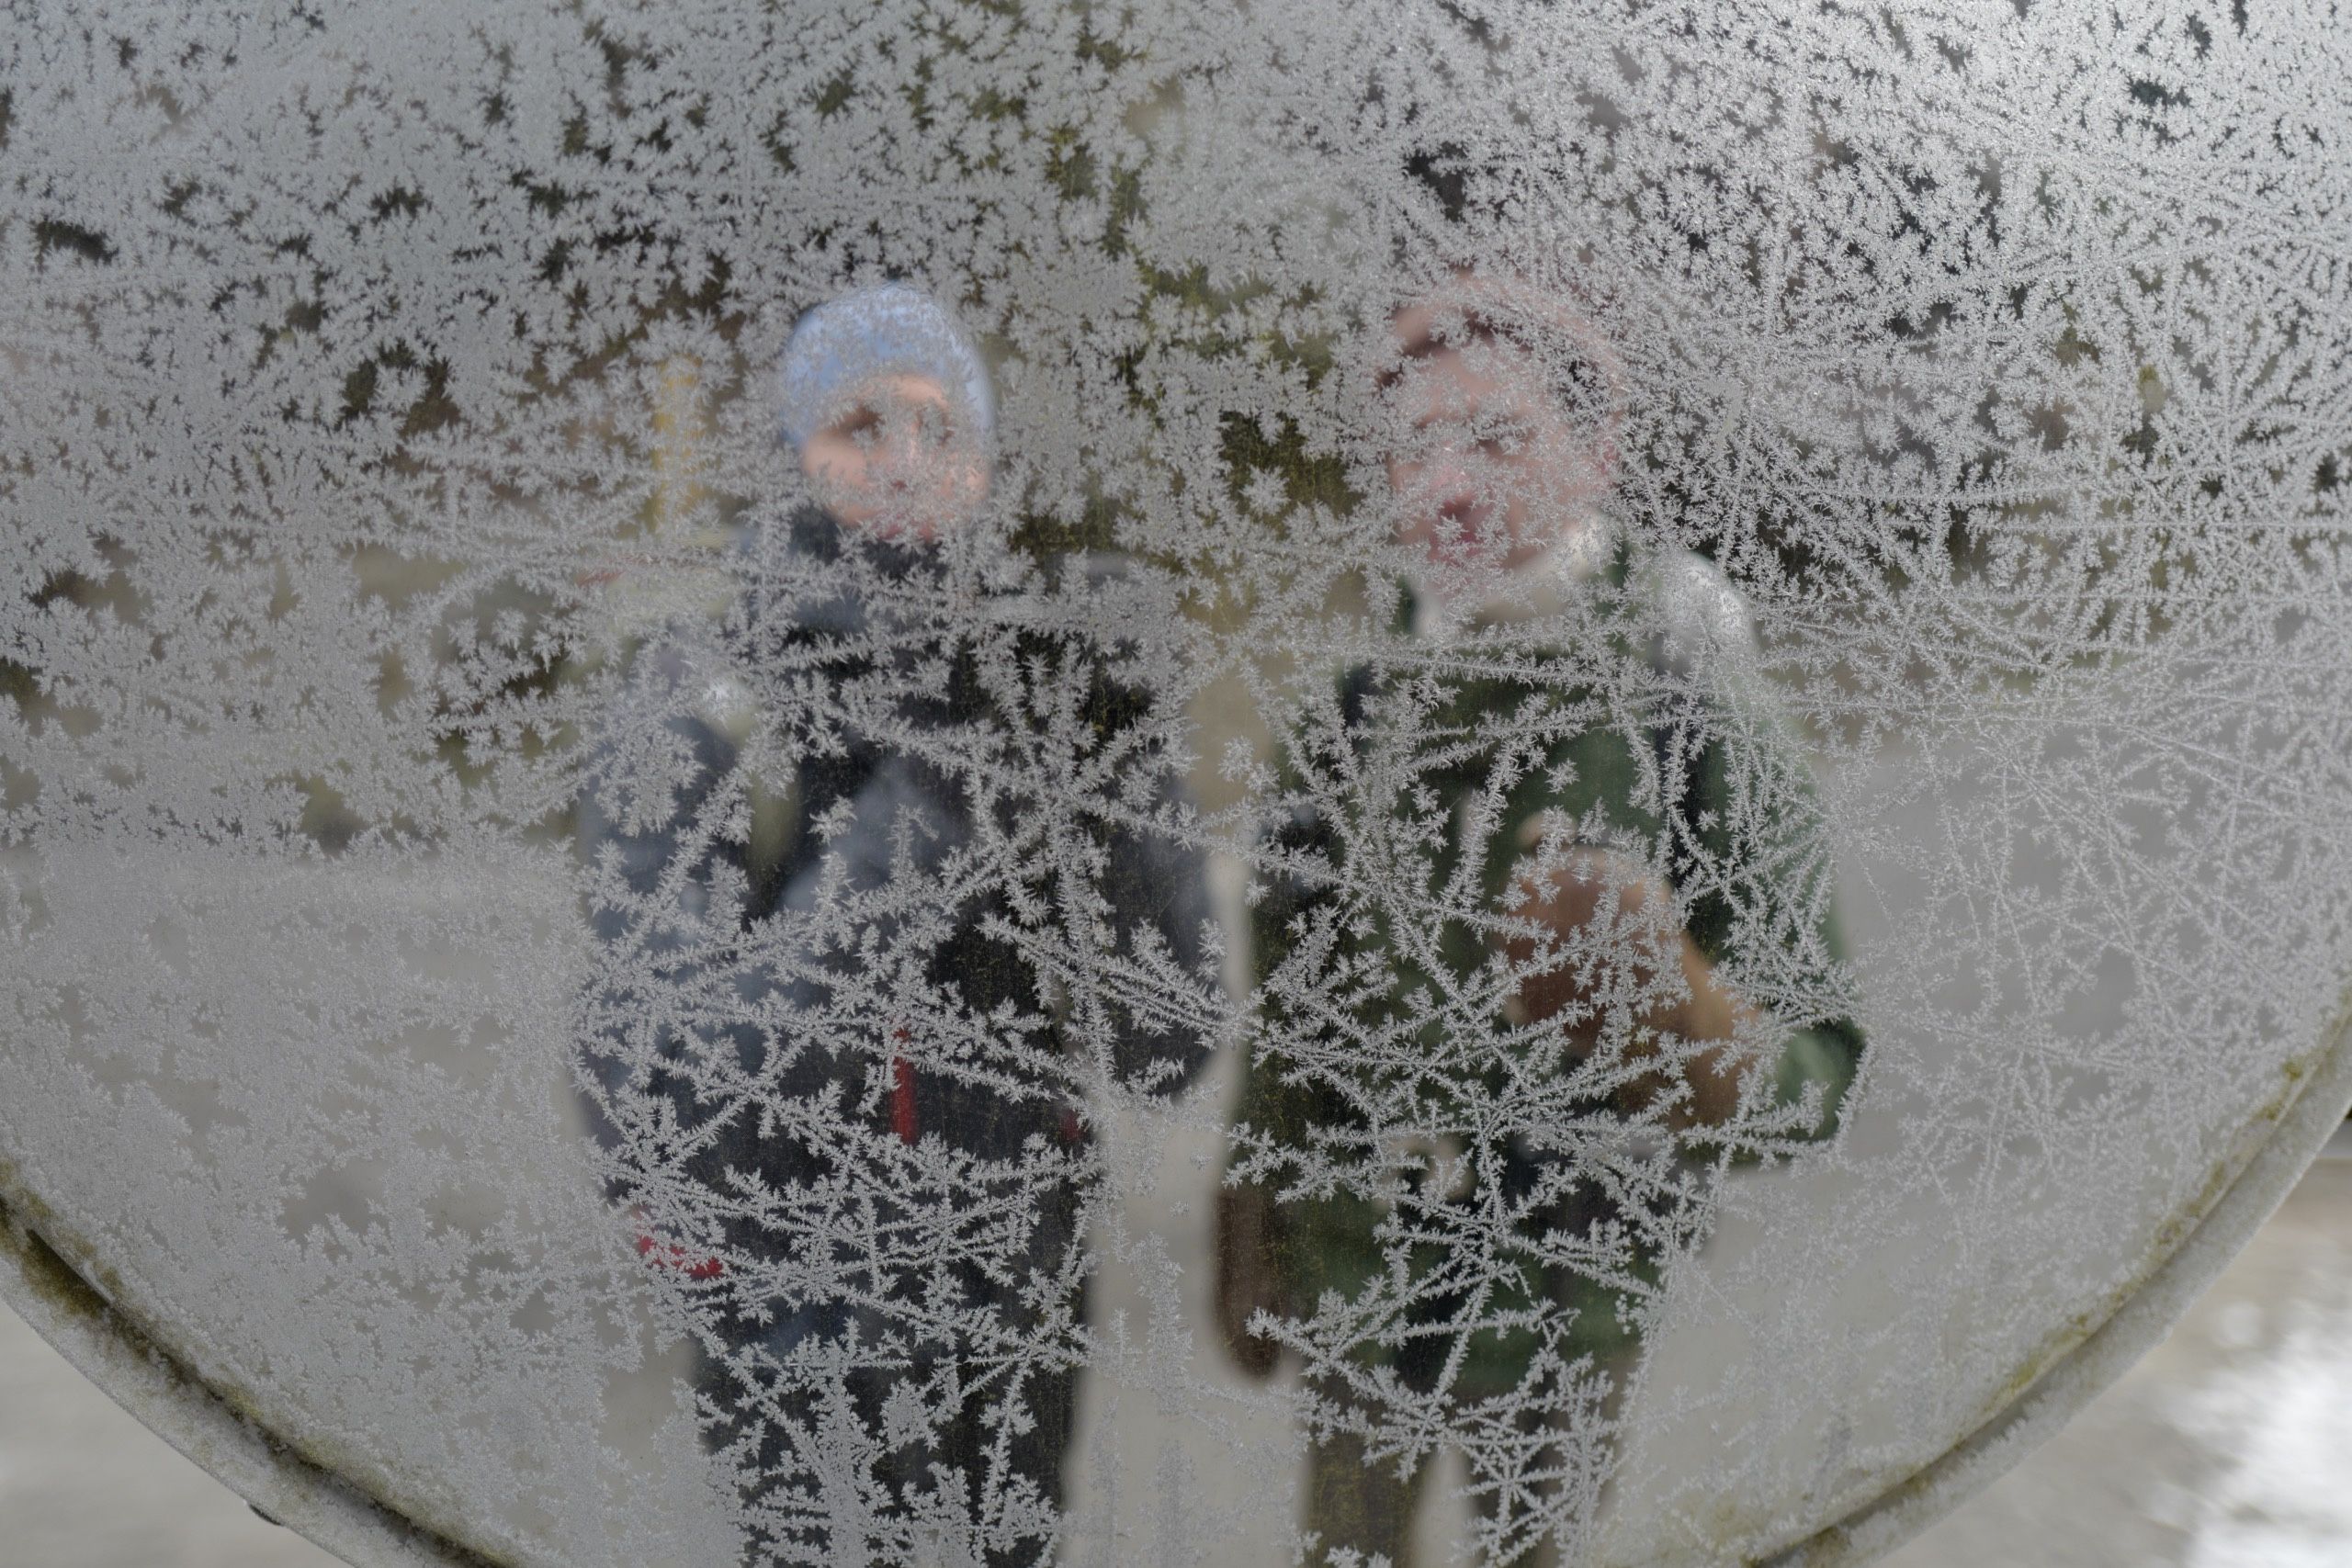 The silhouettes of two people, the author and Gyula Simonyi, reflected in a traffic mirror criss-crossed with frost.